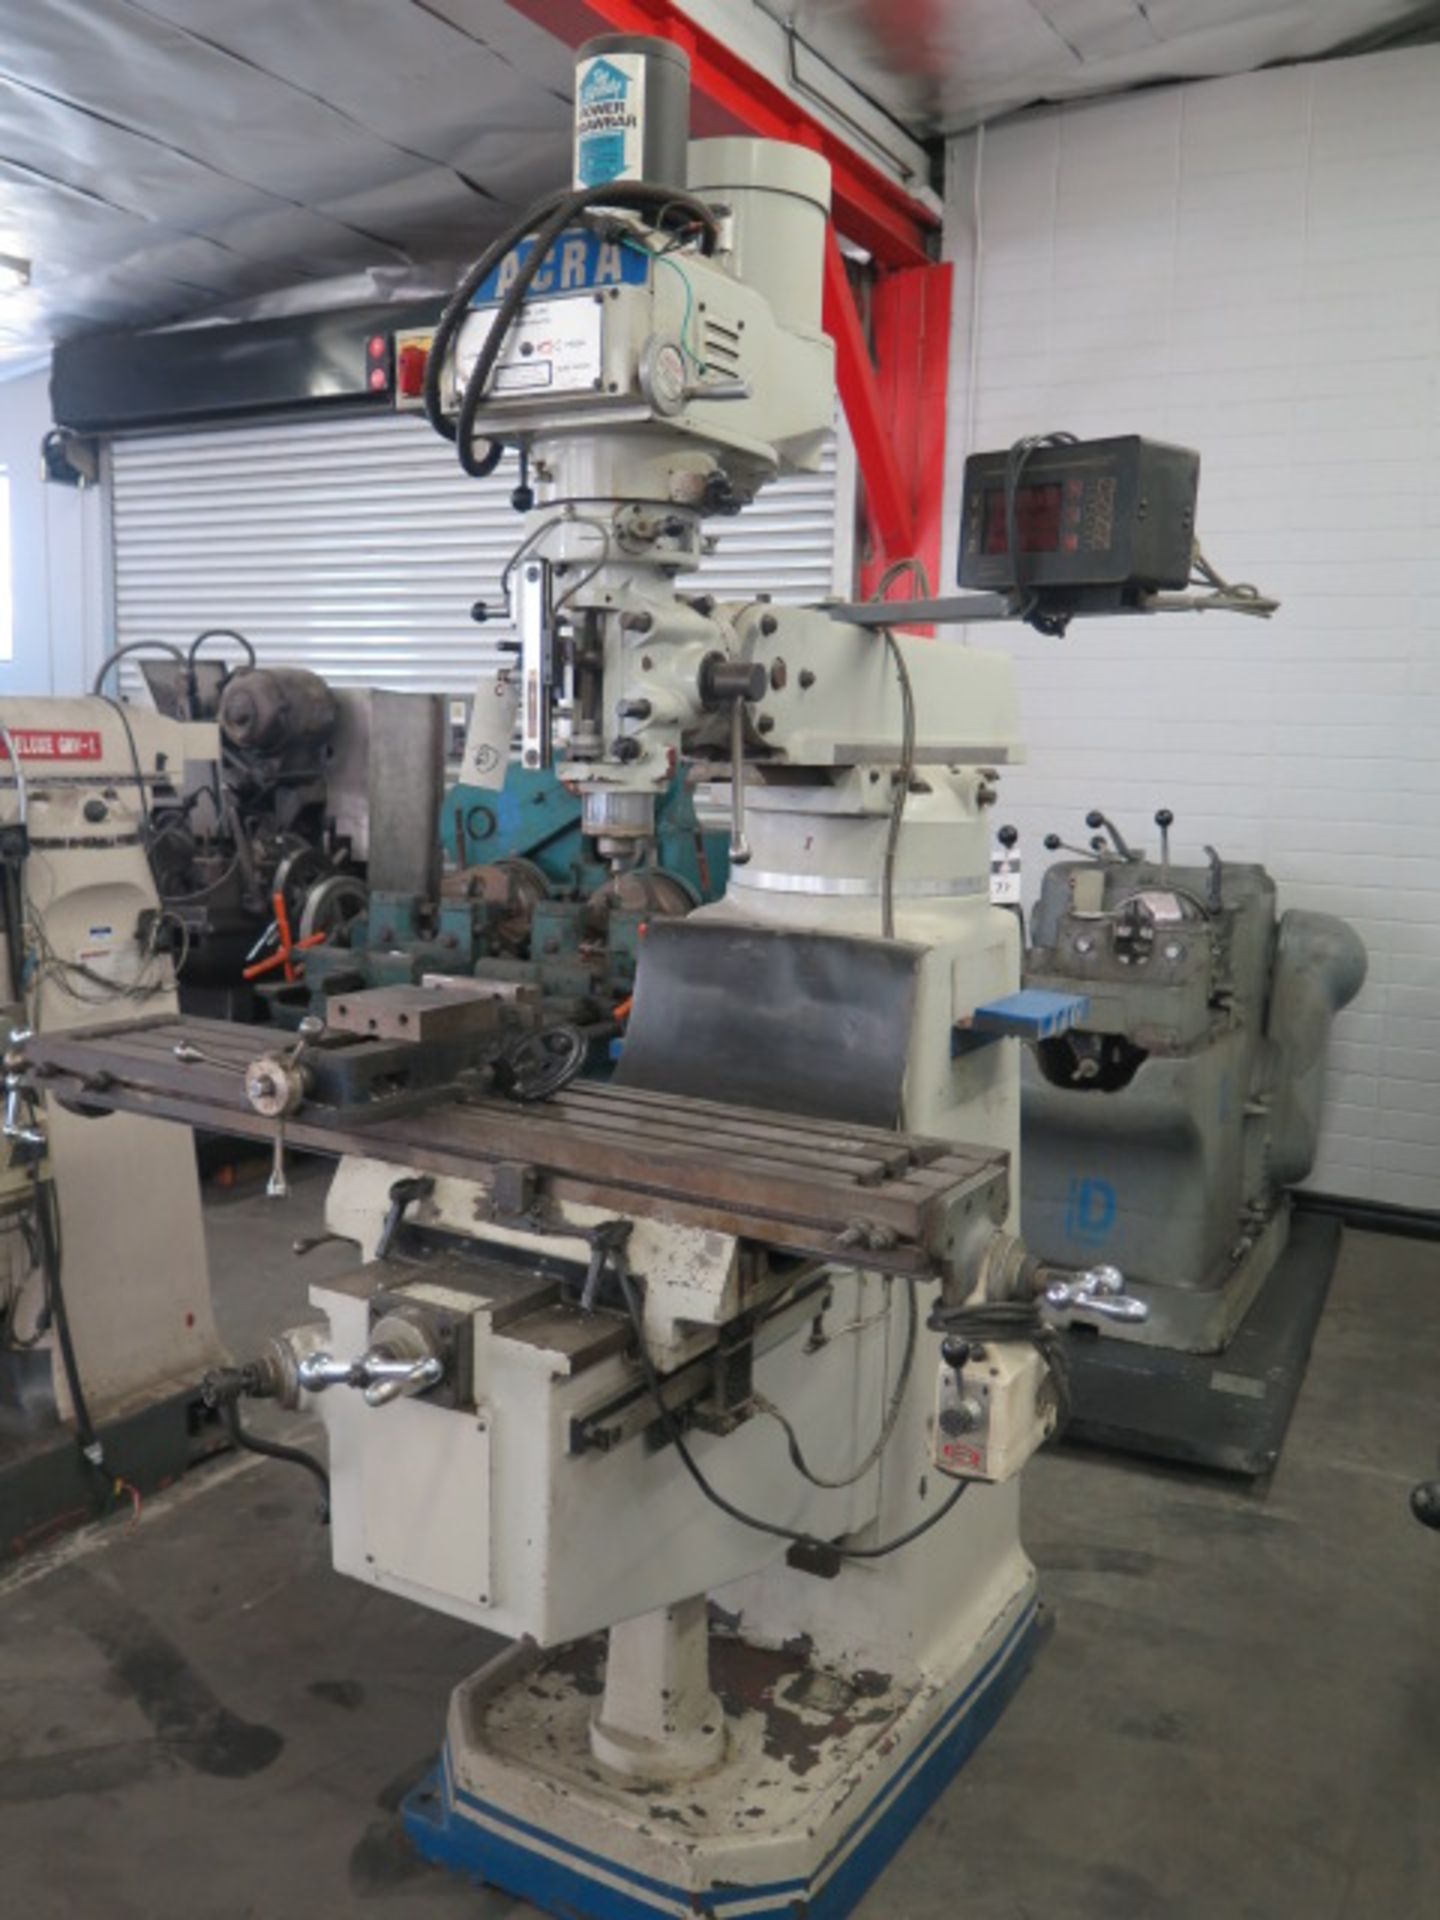 Acra AM-3 Vertical Mill s/n 961819 w/ Sargon 3-Axis DRO, 3Hp Motor, 60-4200 Dial RPM, Sold AS IS - Image 2 of 13